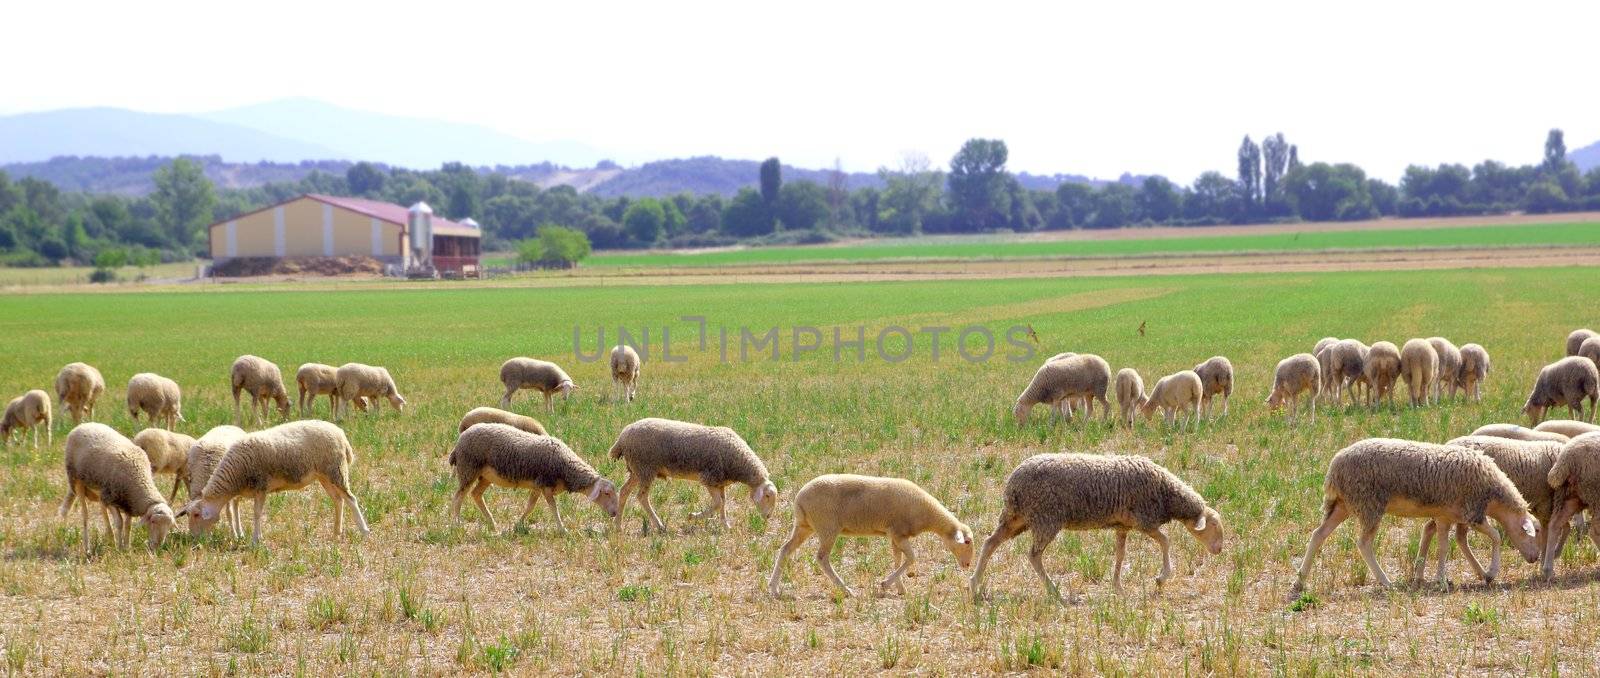 sheep flock grazing meadow in grass field panoramic view